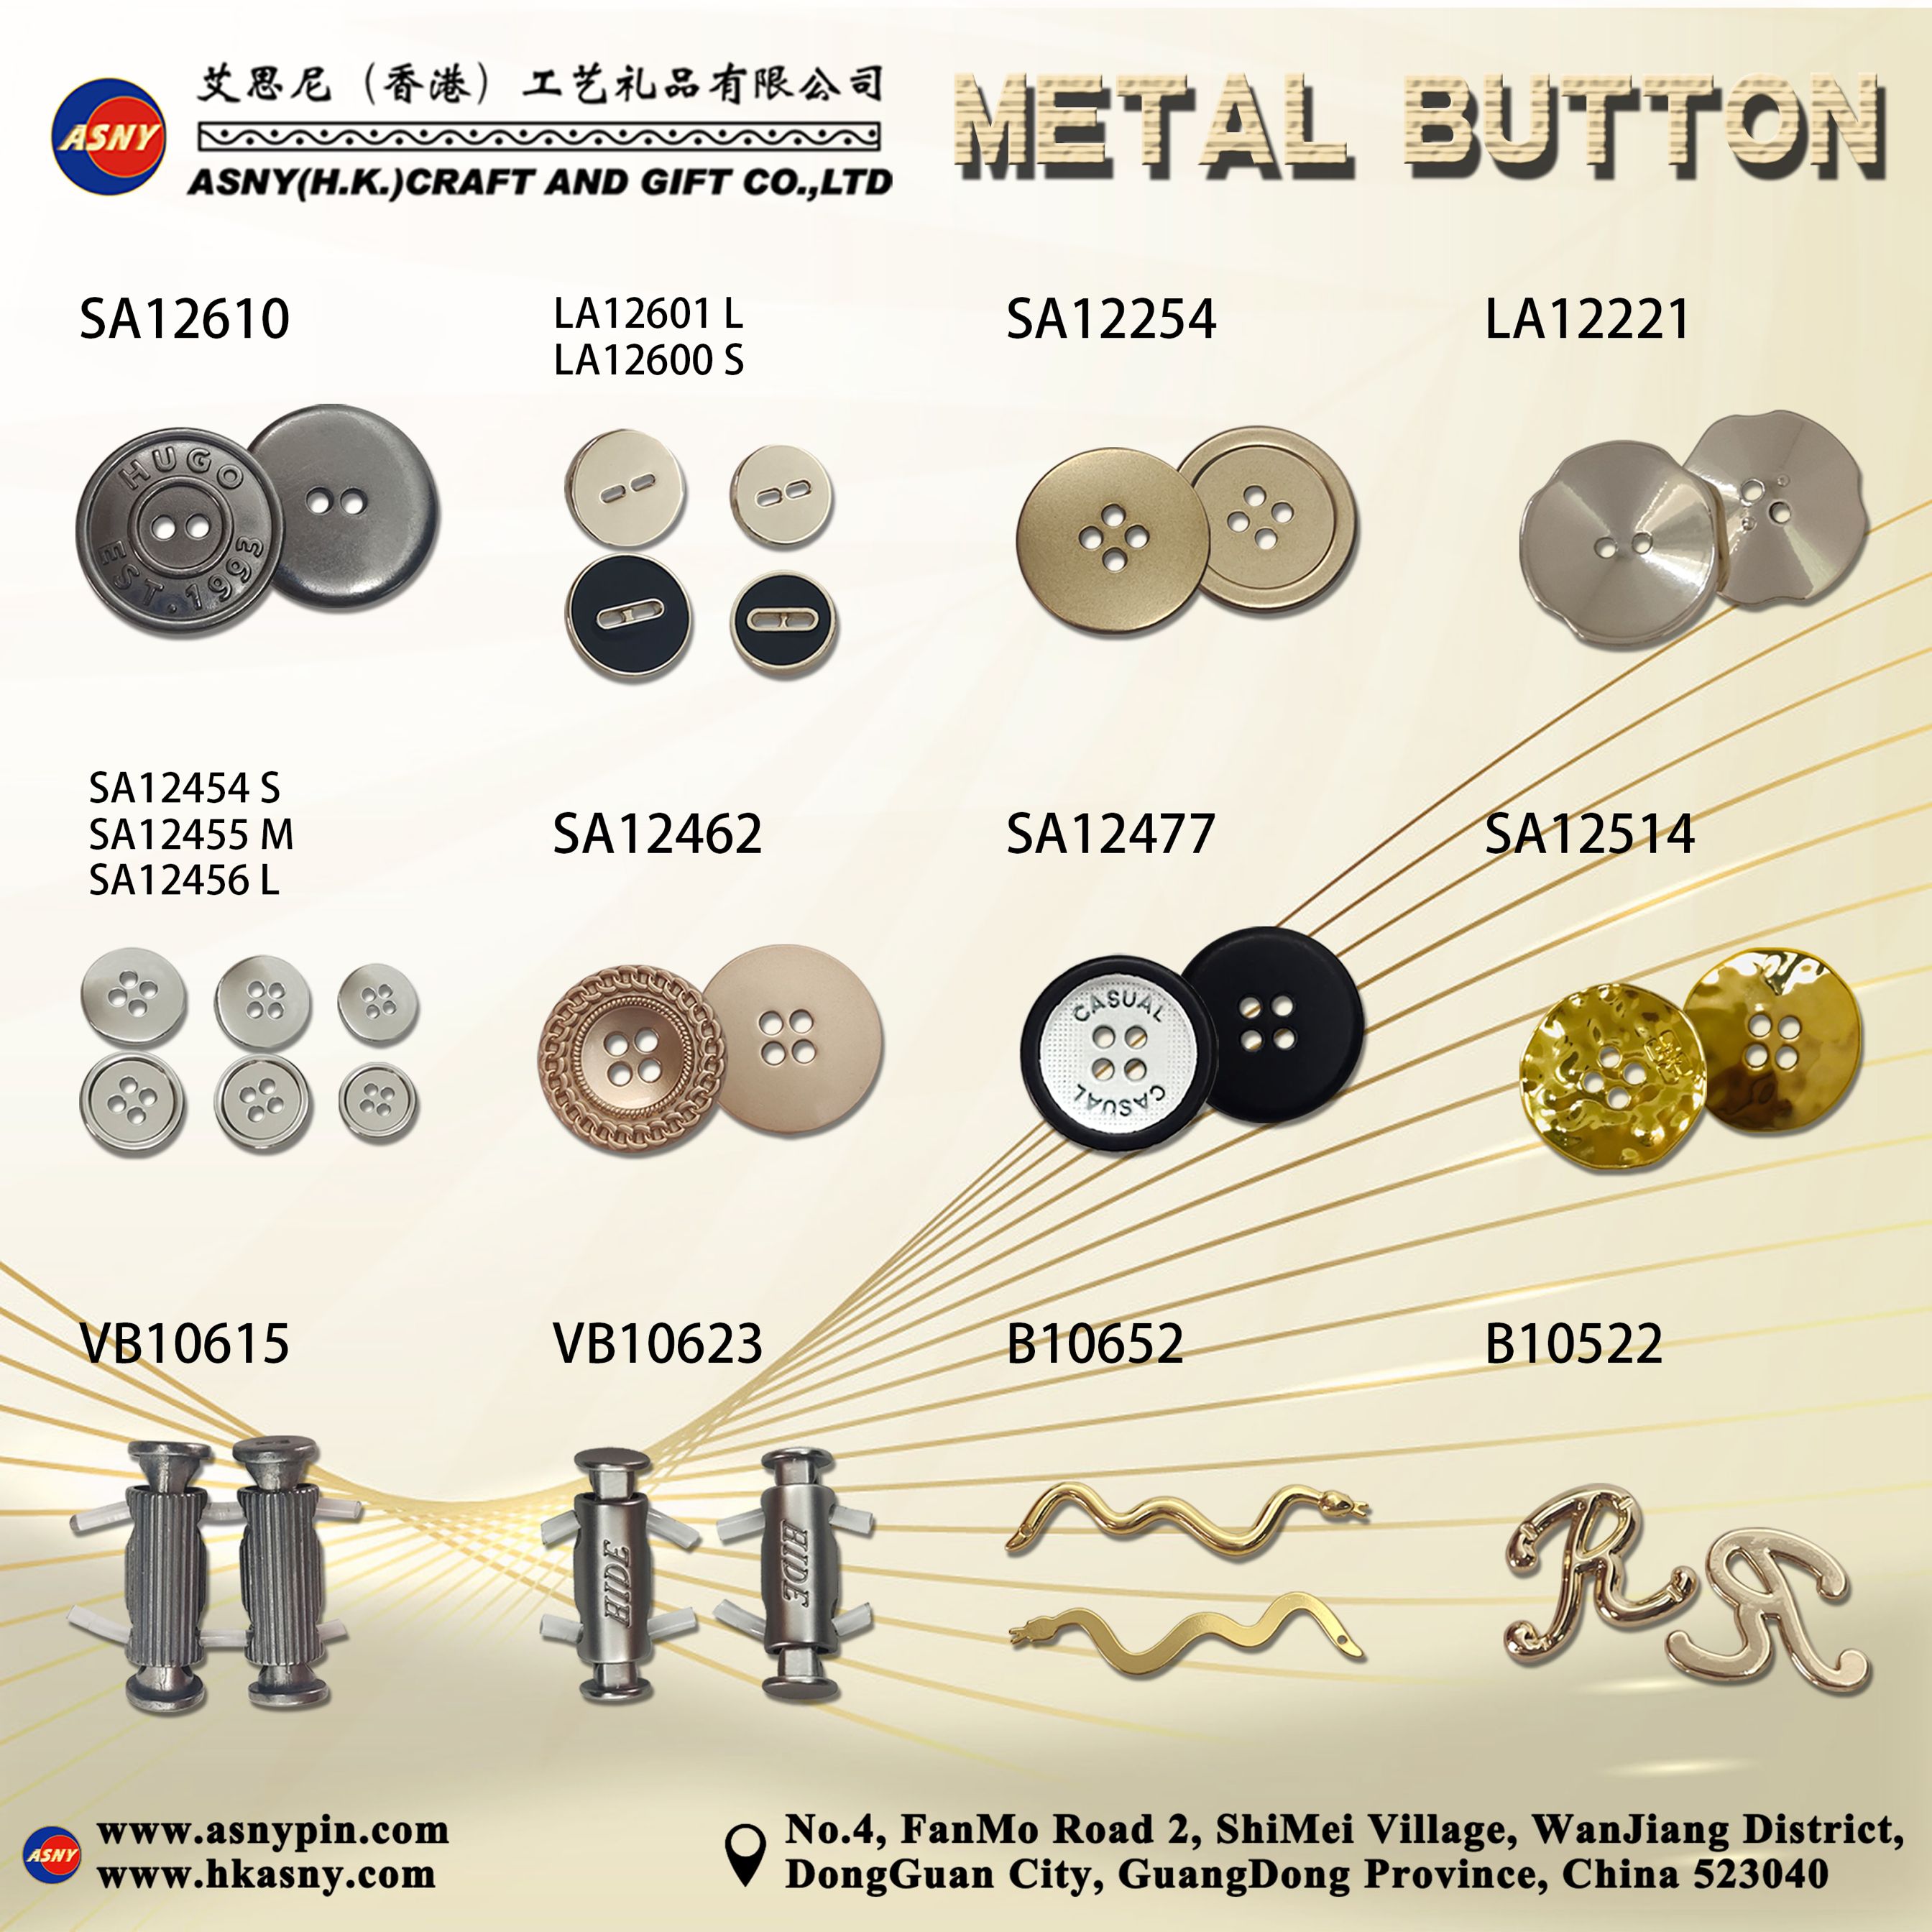 Catalog  - Accessory - Clothes/Shoes Metal Button Design/Production/Make/Supply/Factory (1)